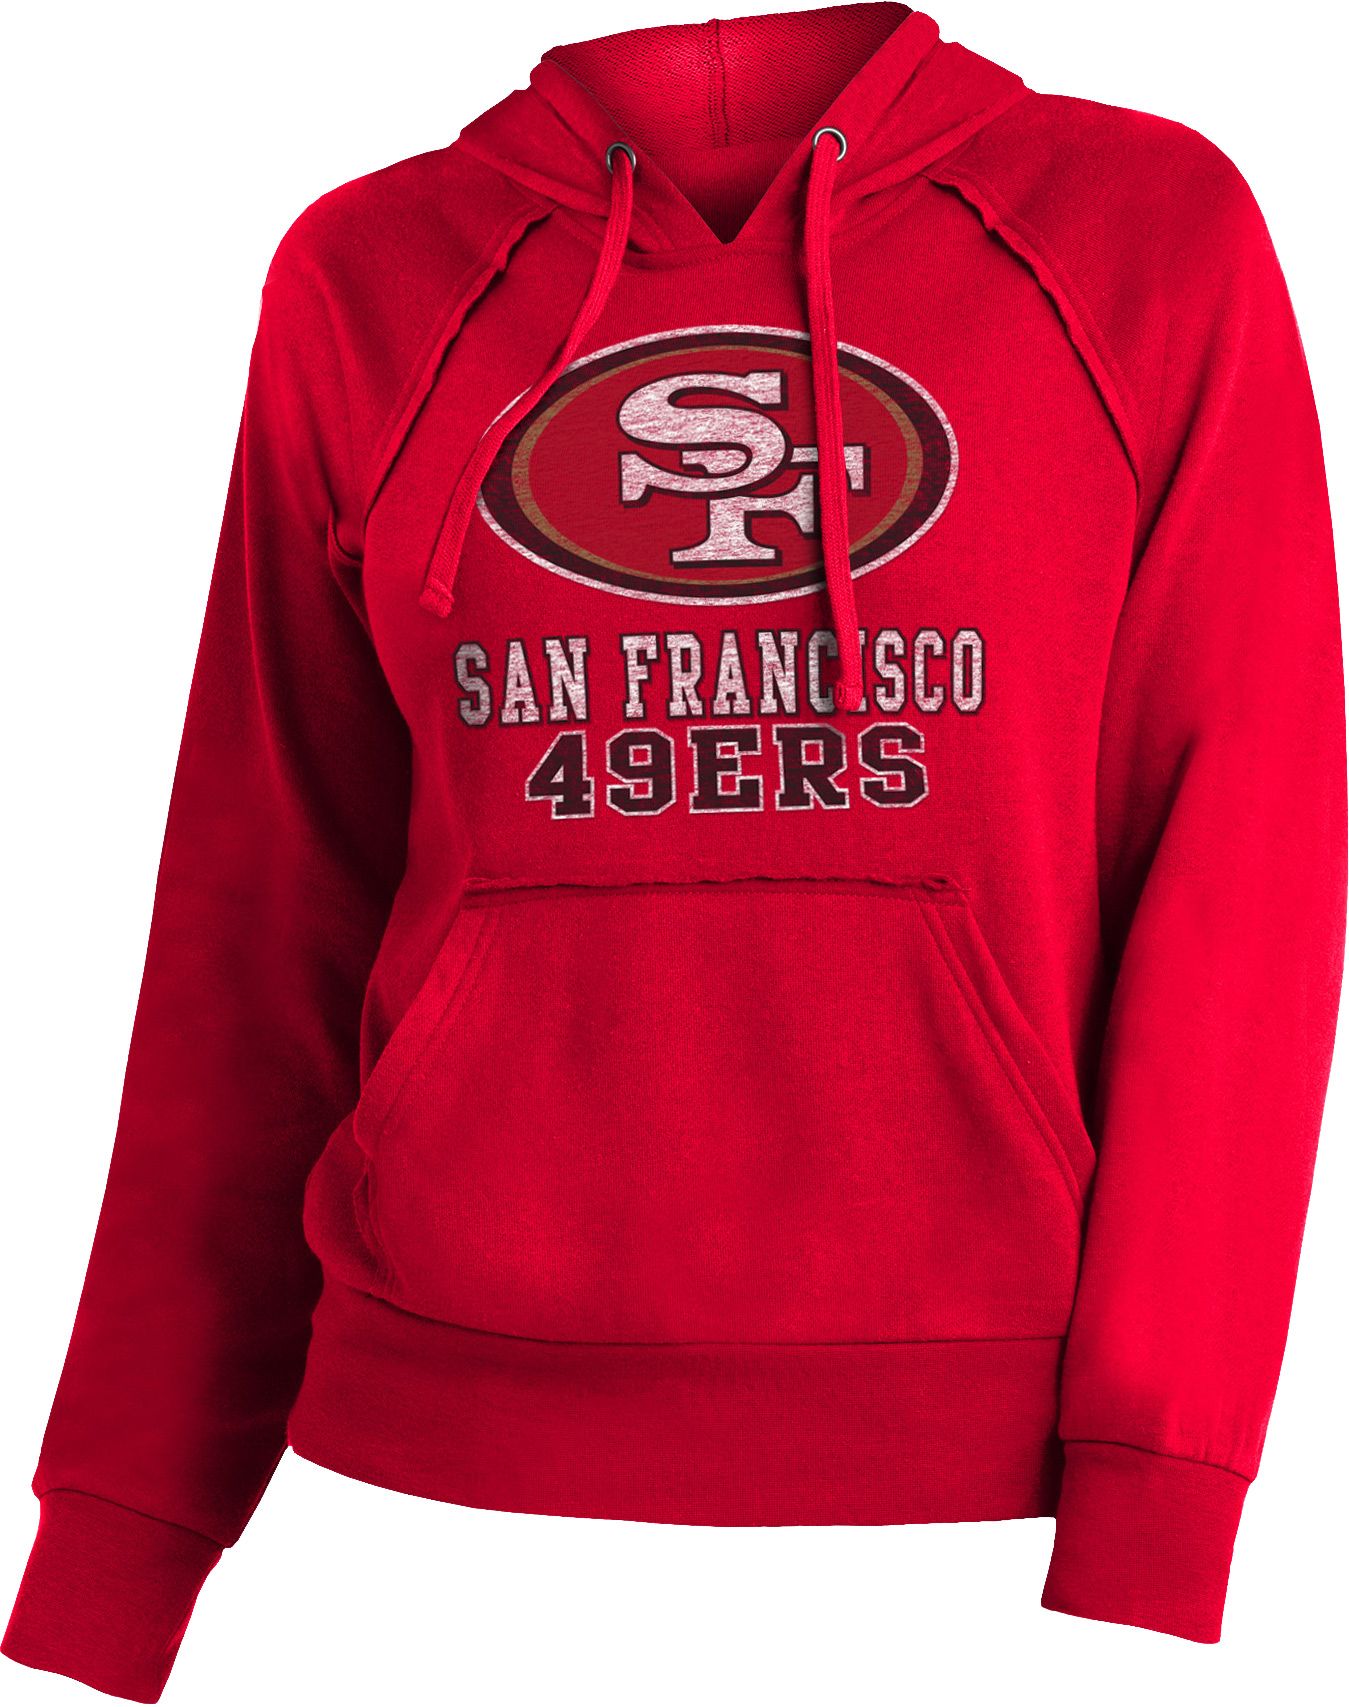 red pullover hoodie women's